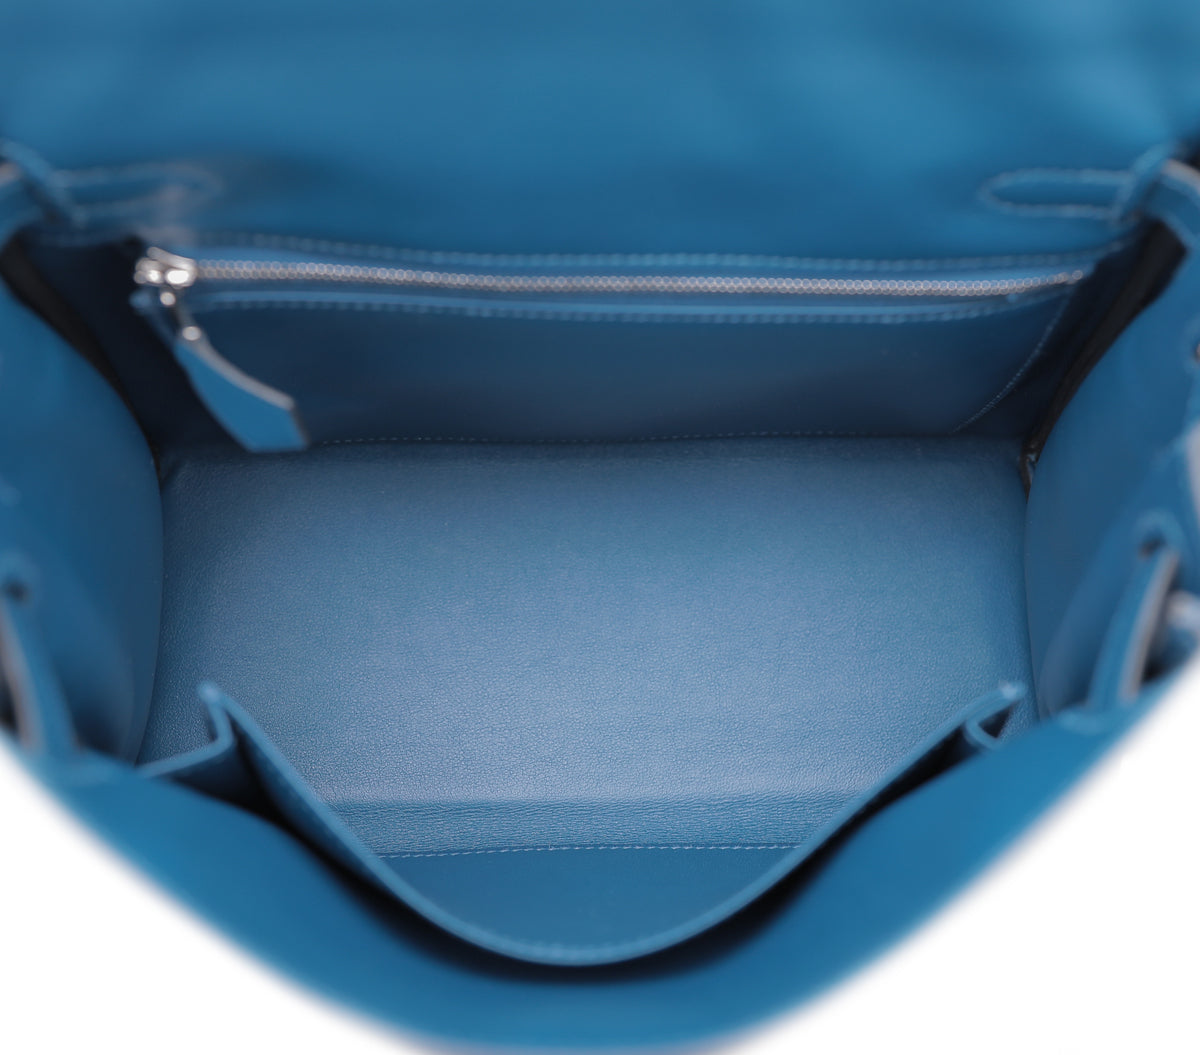 This stunning Hermès Kelly 25cm bag is featured in Deep Blue color